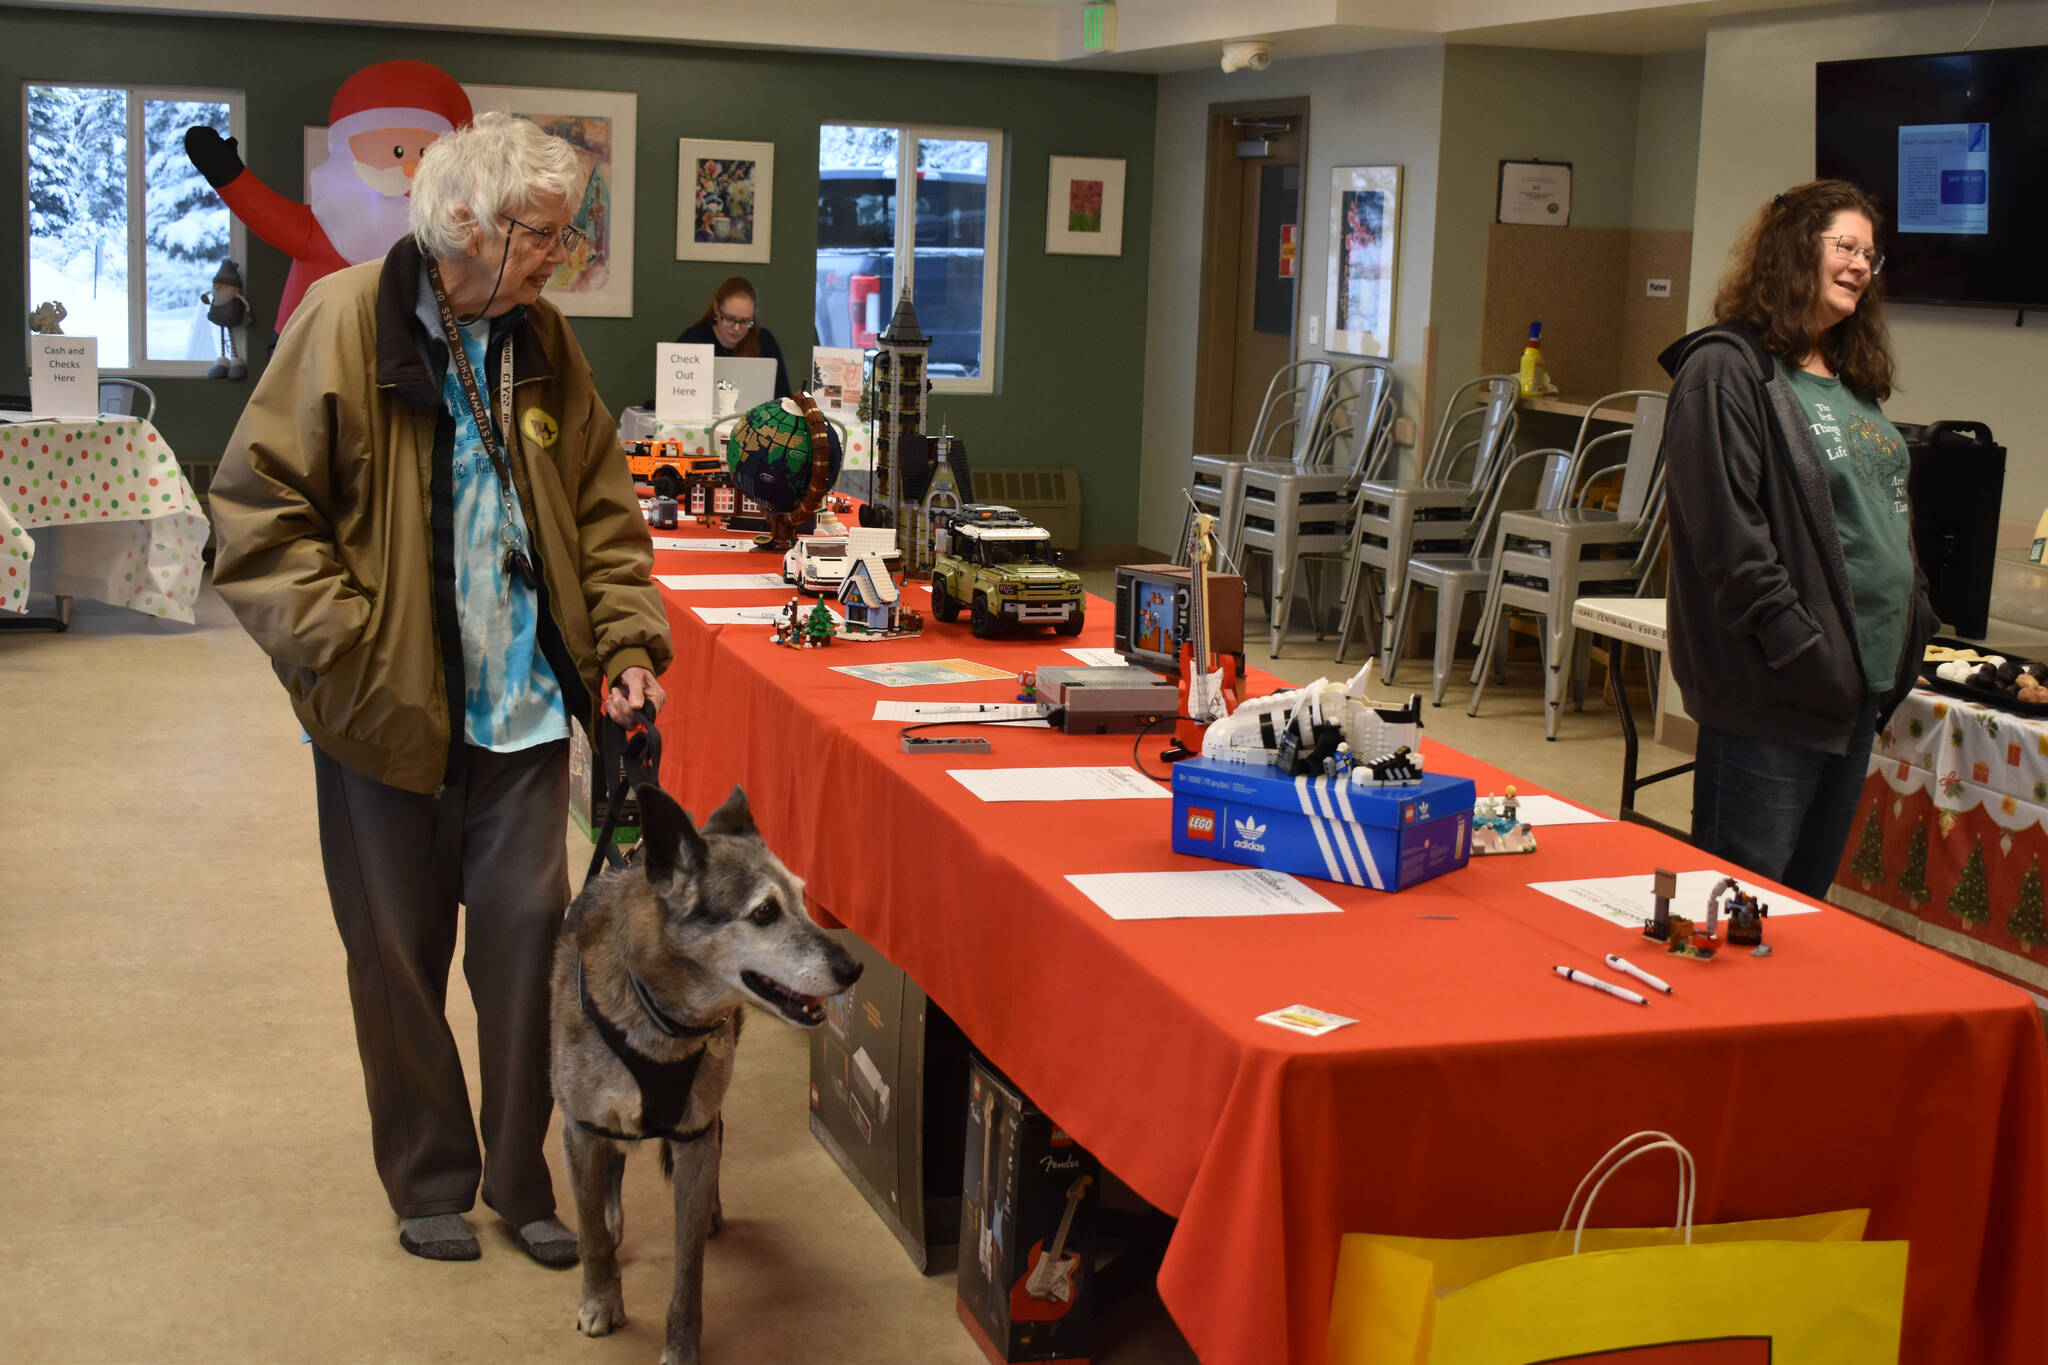 Blue peruses the Lego sets being auctioned off with his owner during Bark, Block and Bowl on Saturday, Dec. 10, 2022, at the Kenai Peninsula Food Bank in Soldotna, Alaska. (Jake Dye/Peninsula Clarion)